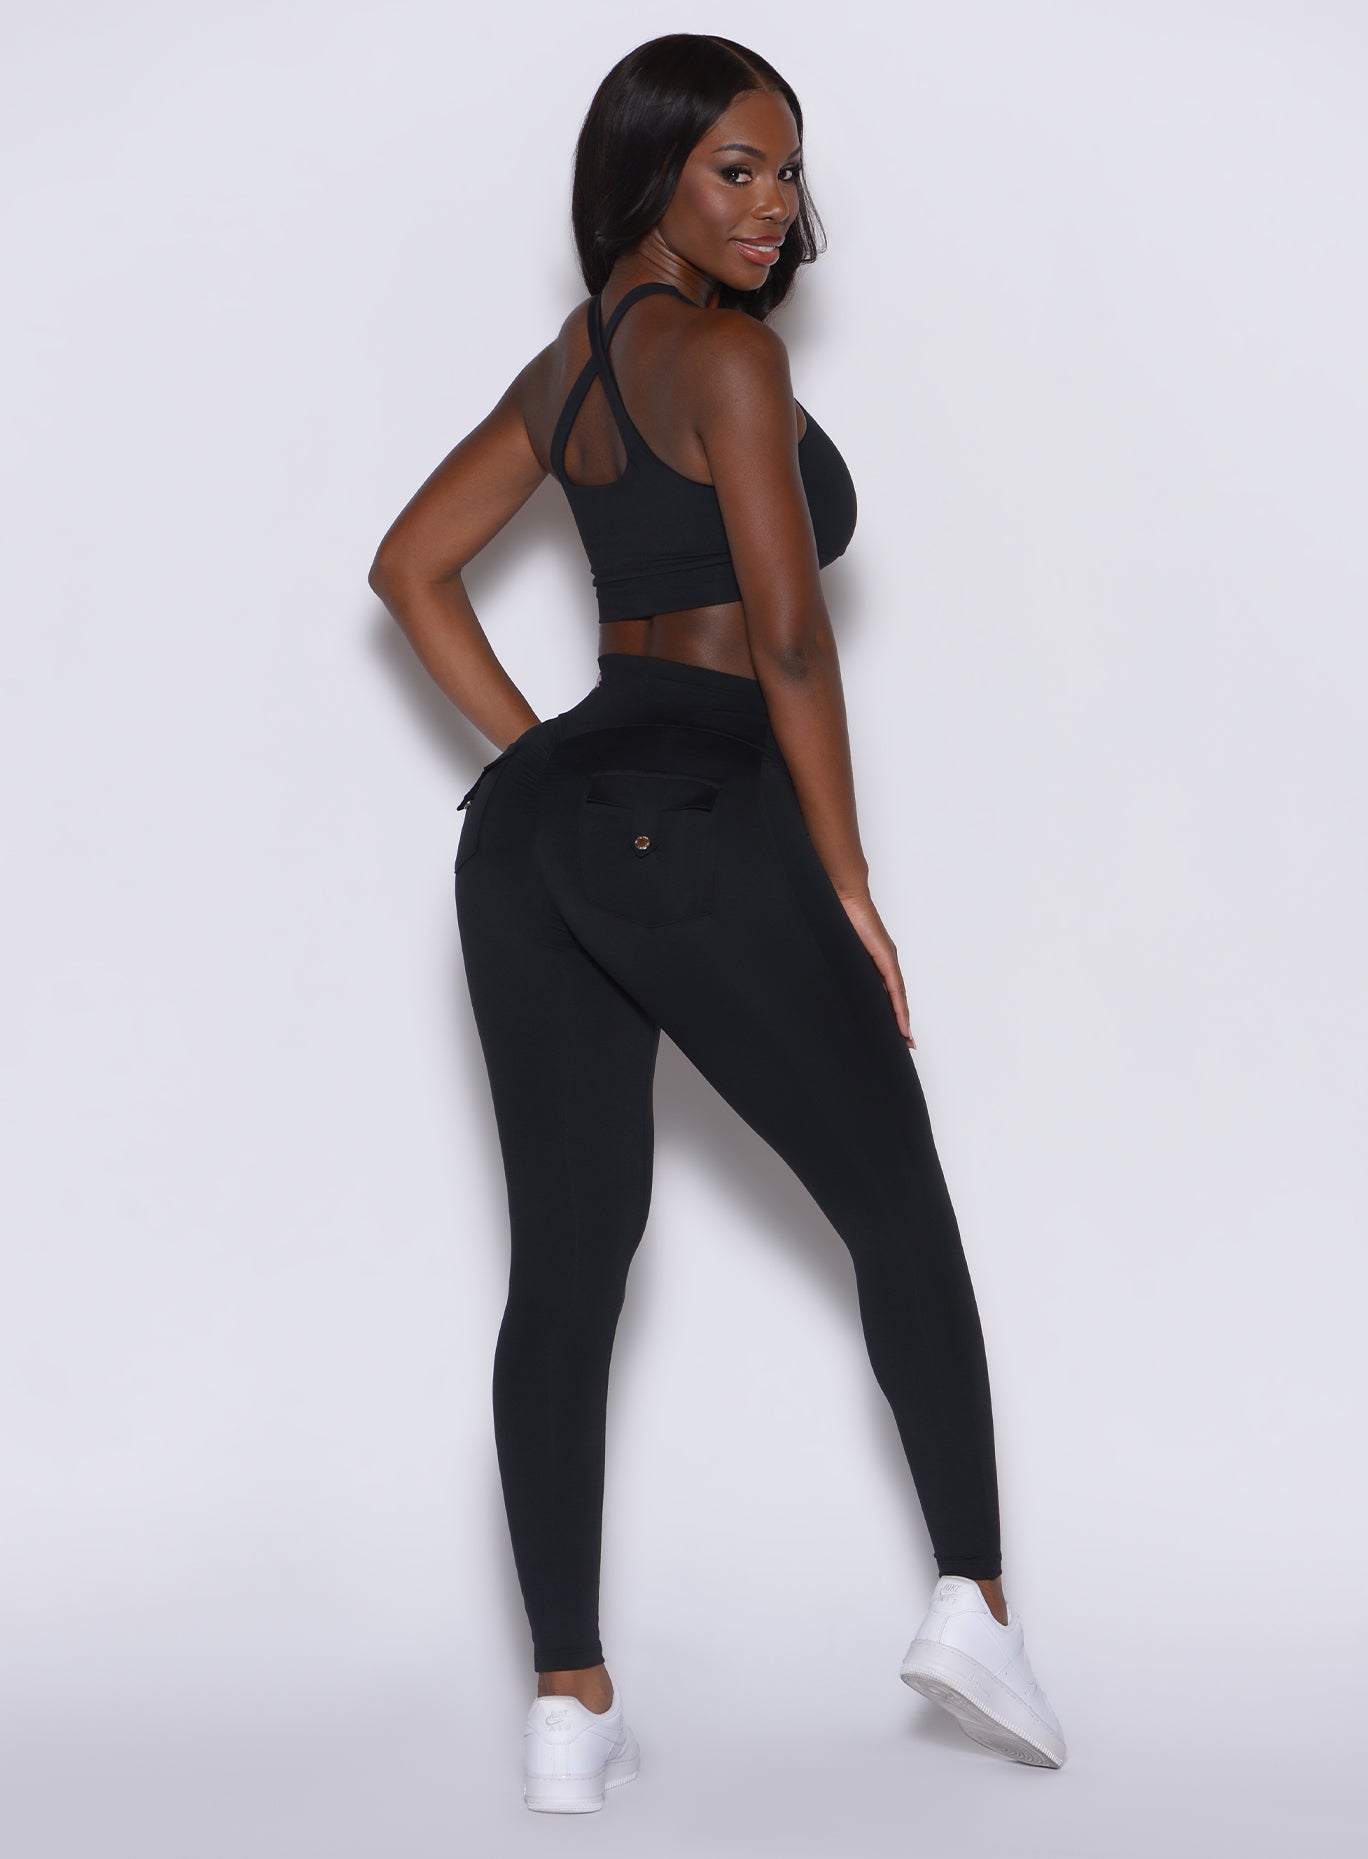 Right side profile view of a model wearing our black pocket pop leggings along with the matching bra